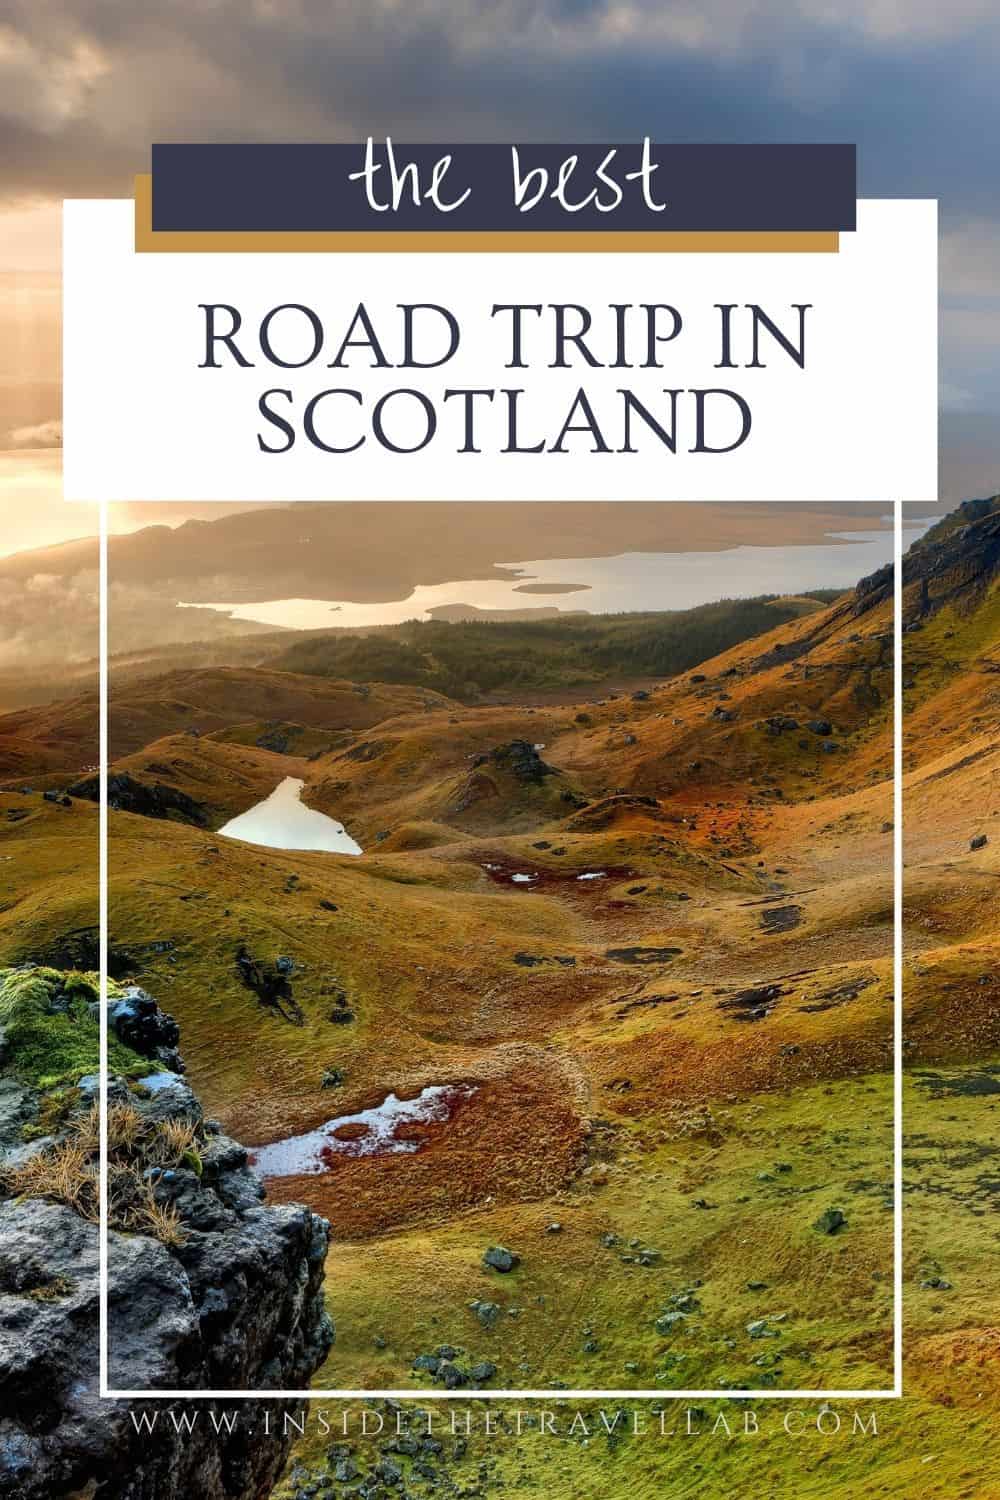 Road trip in Scotland travel guide and itinerary